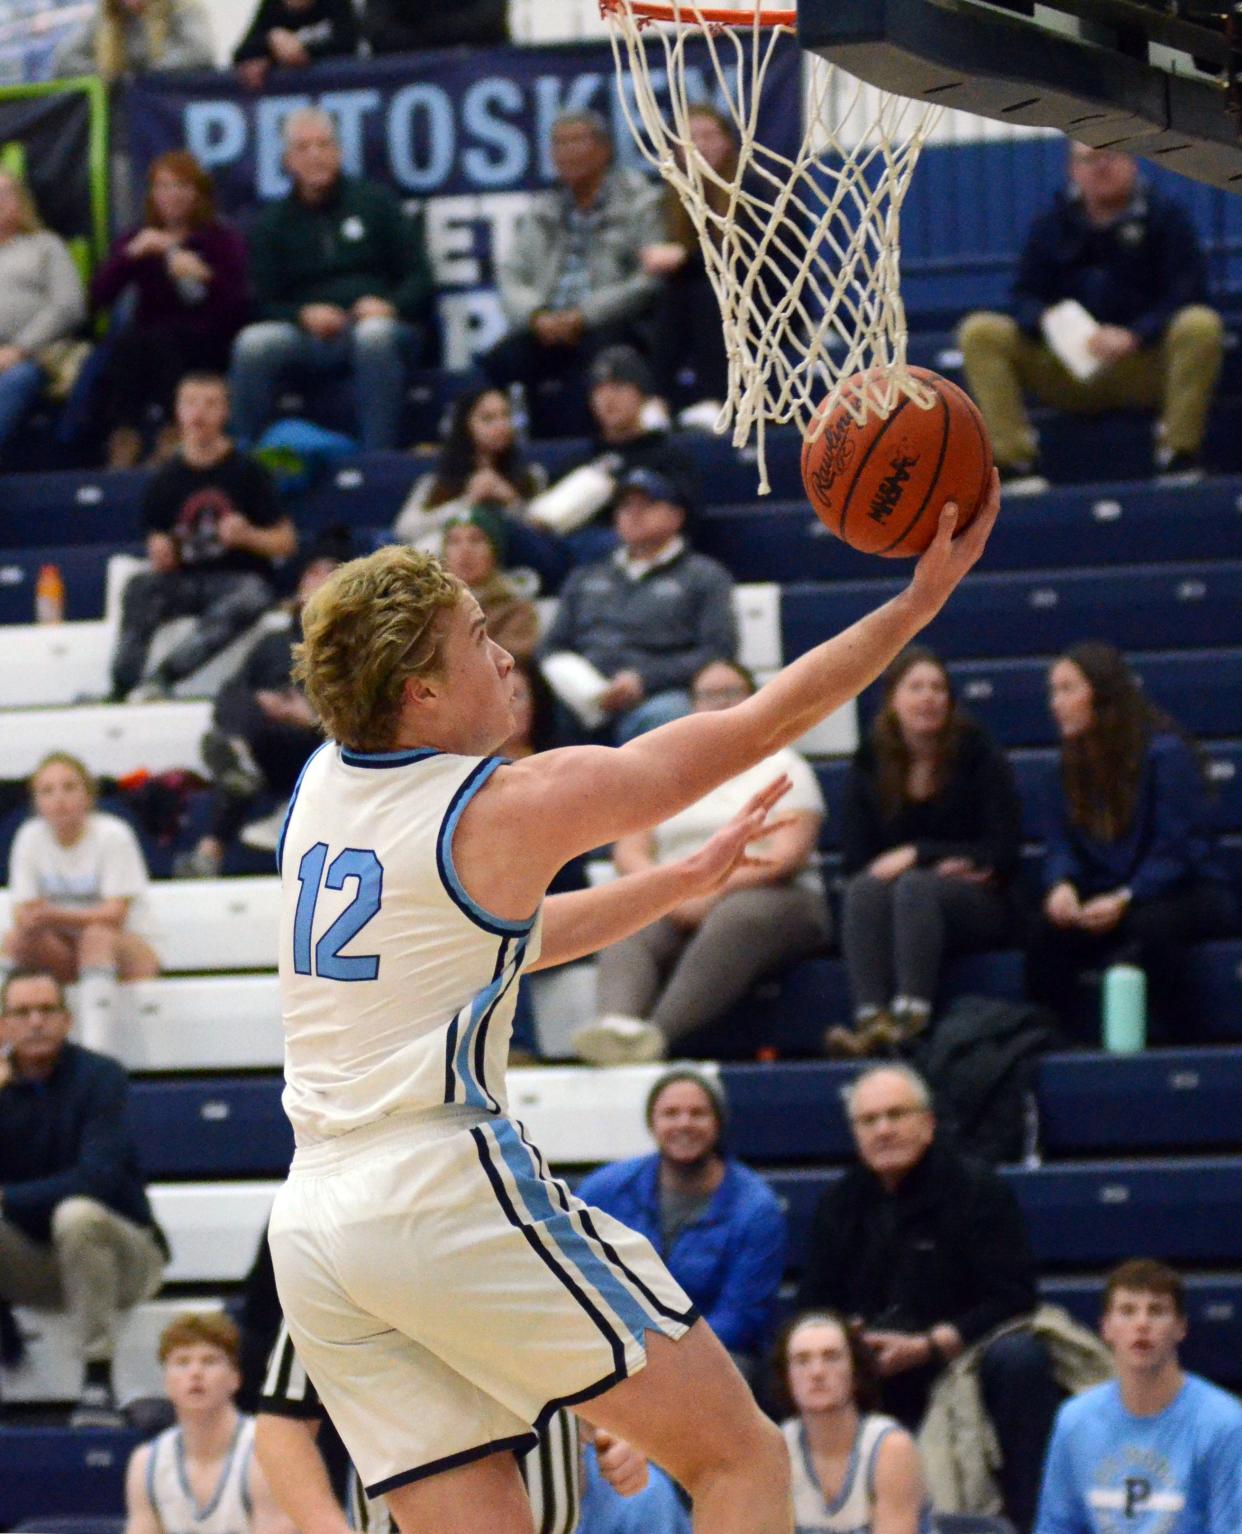 Petoskey's Michael Squires put in a strong performance on the road, but the Northmen have to rebound from a second straight league loss.